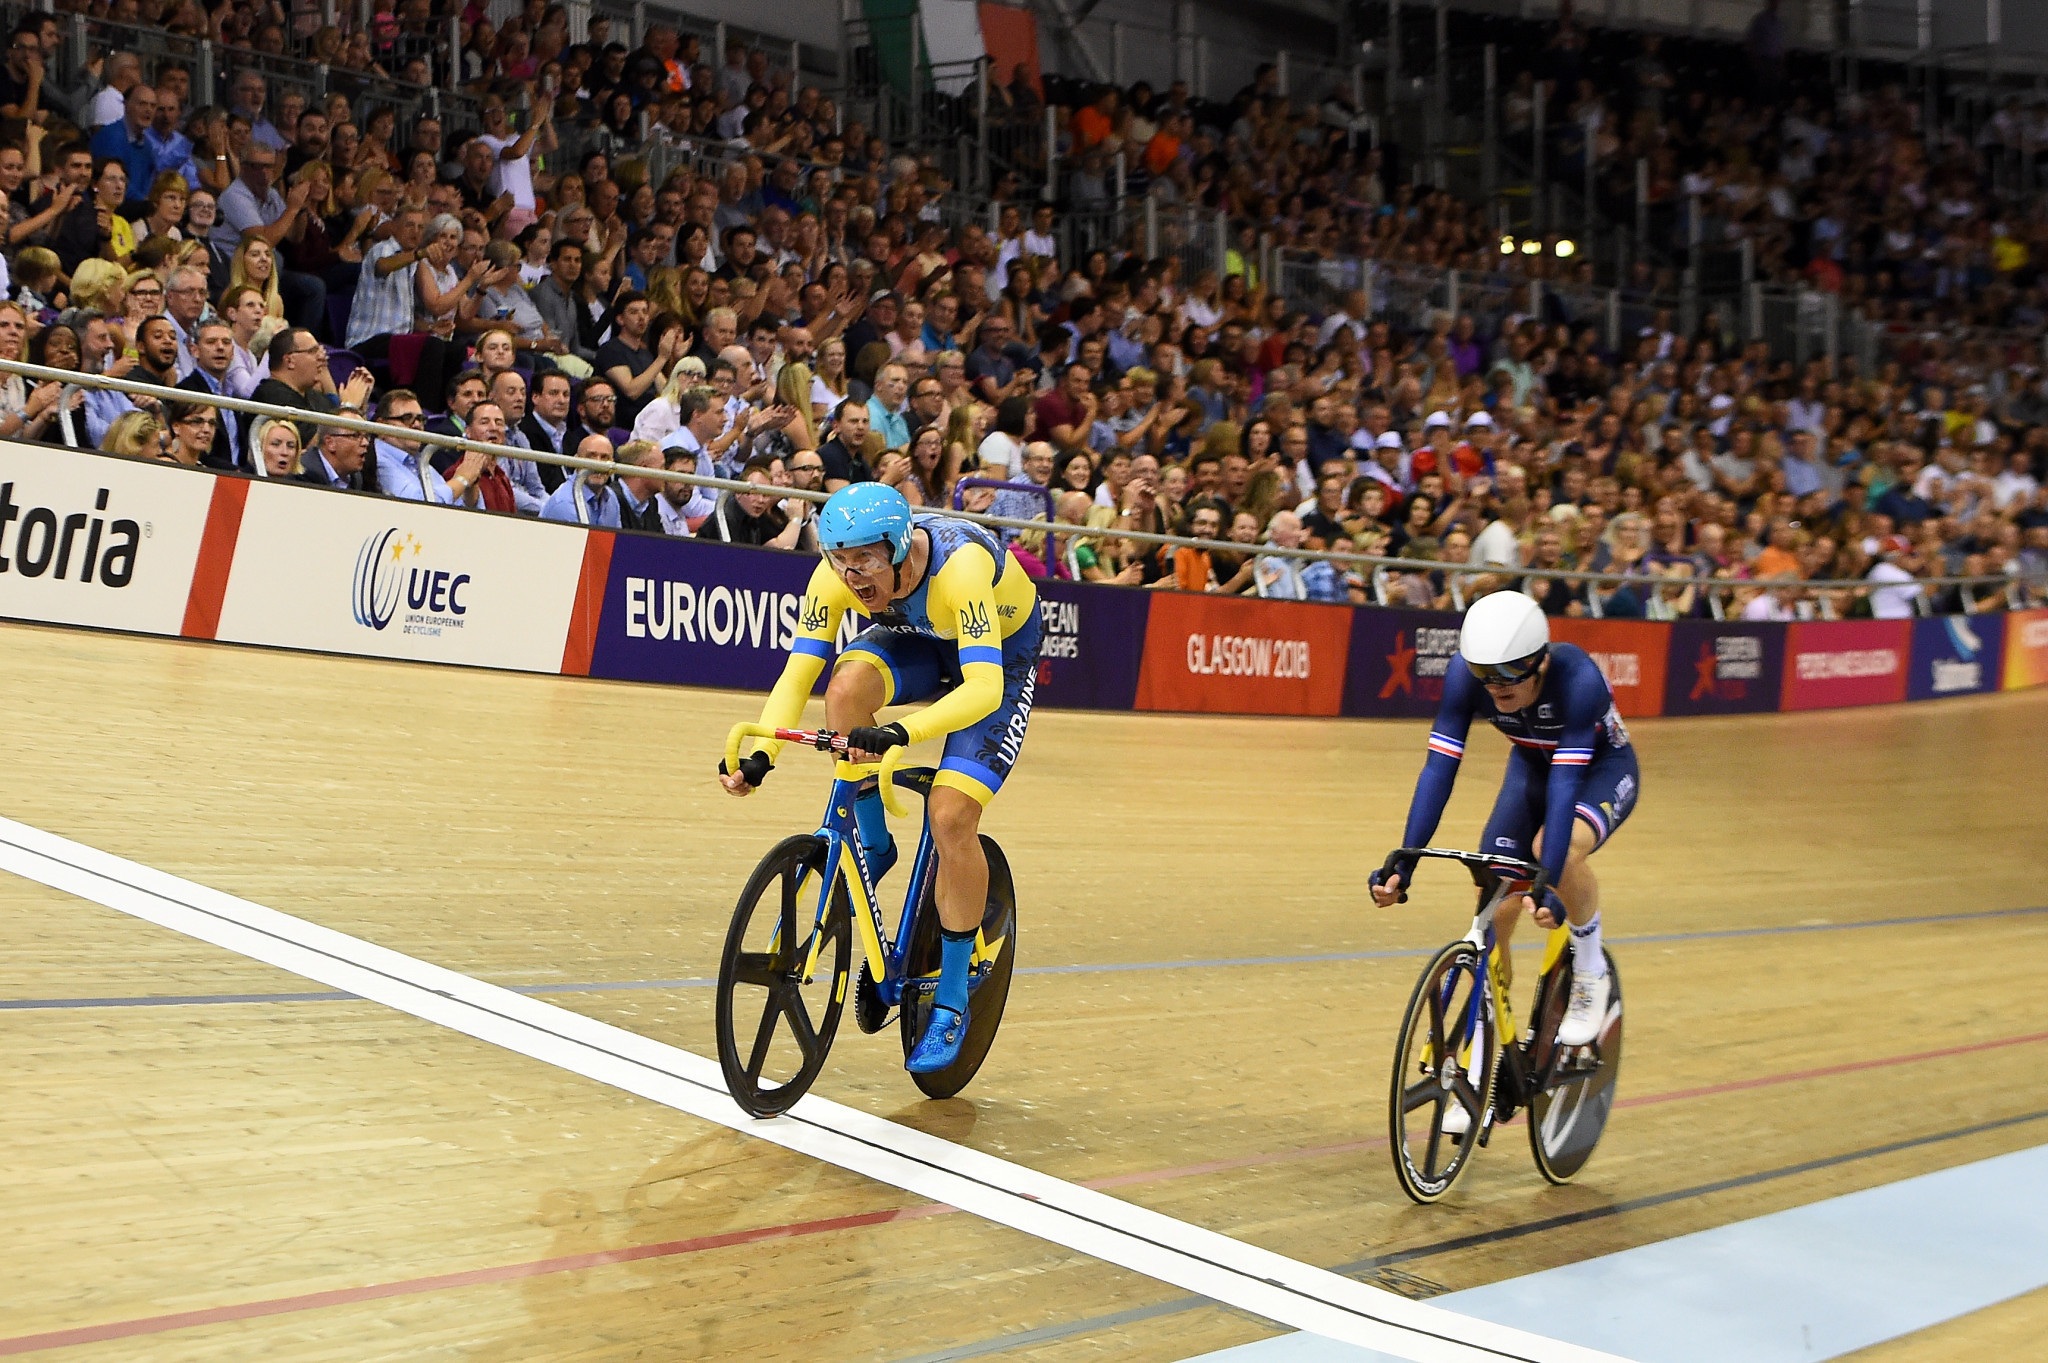 Medals in track cycling and swimming medals were also decided on day two ©Getty Images